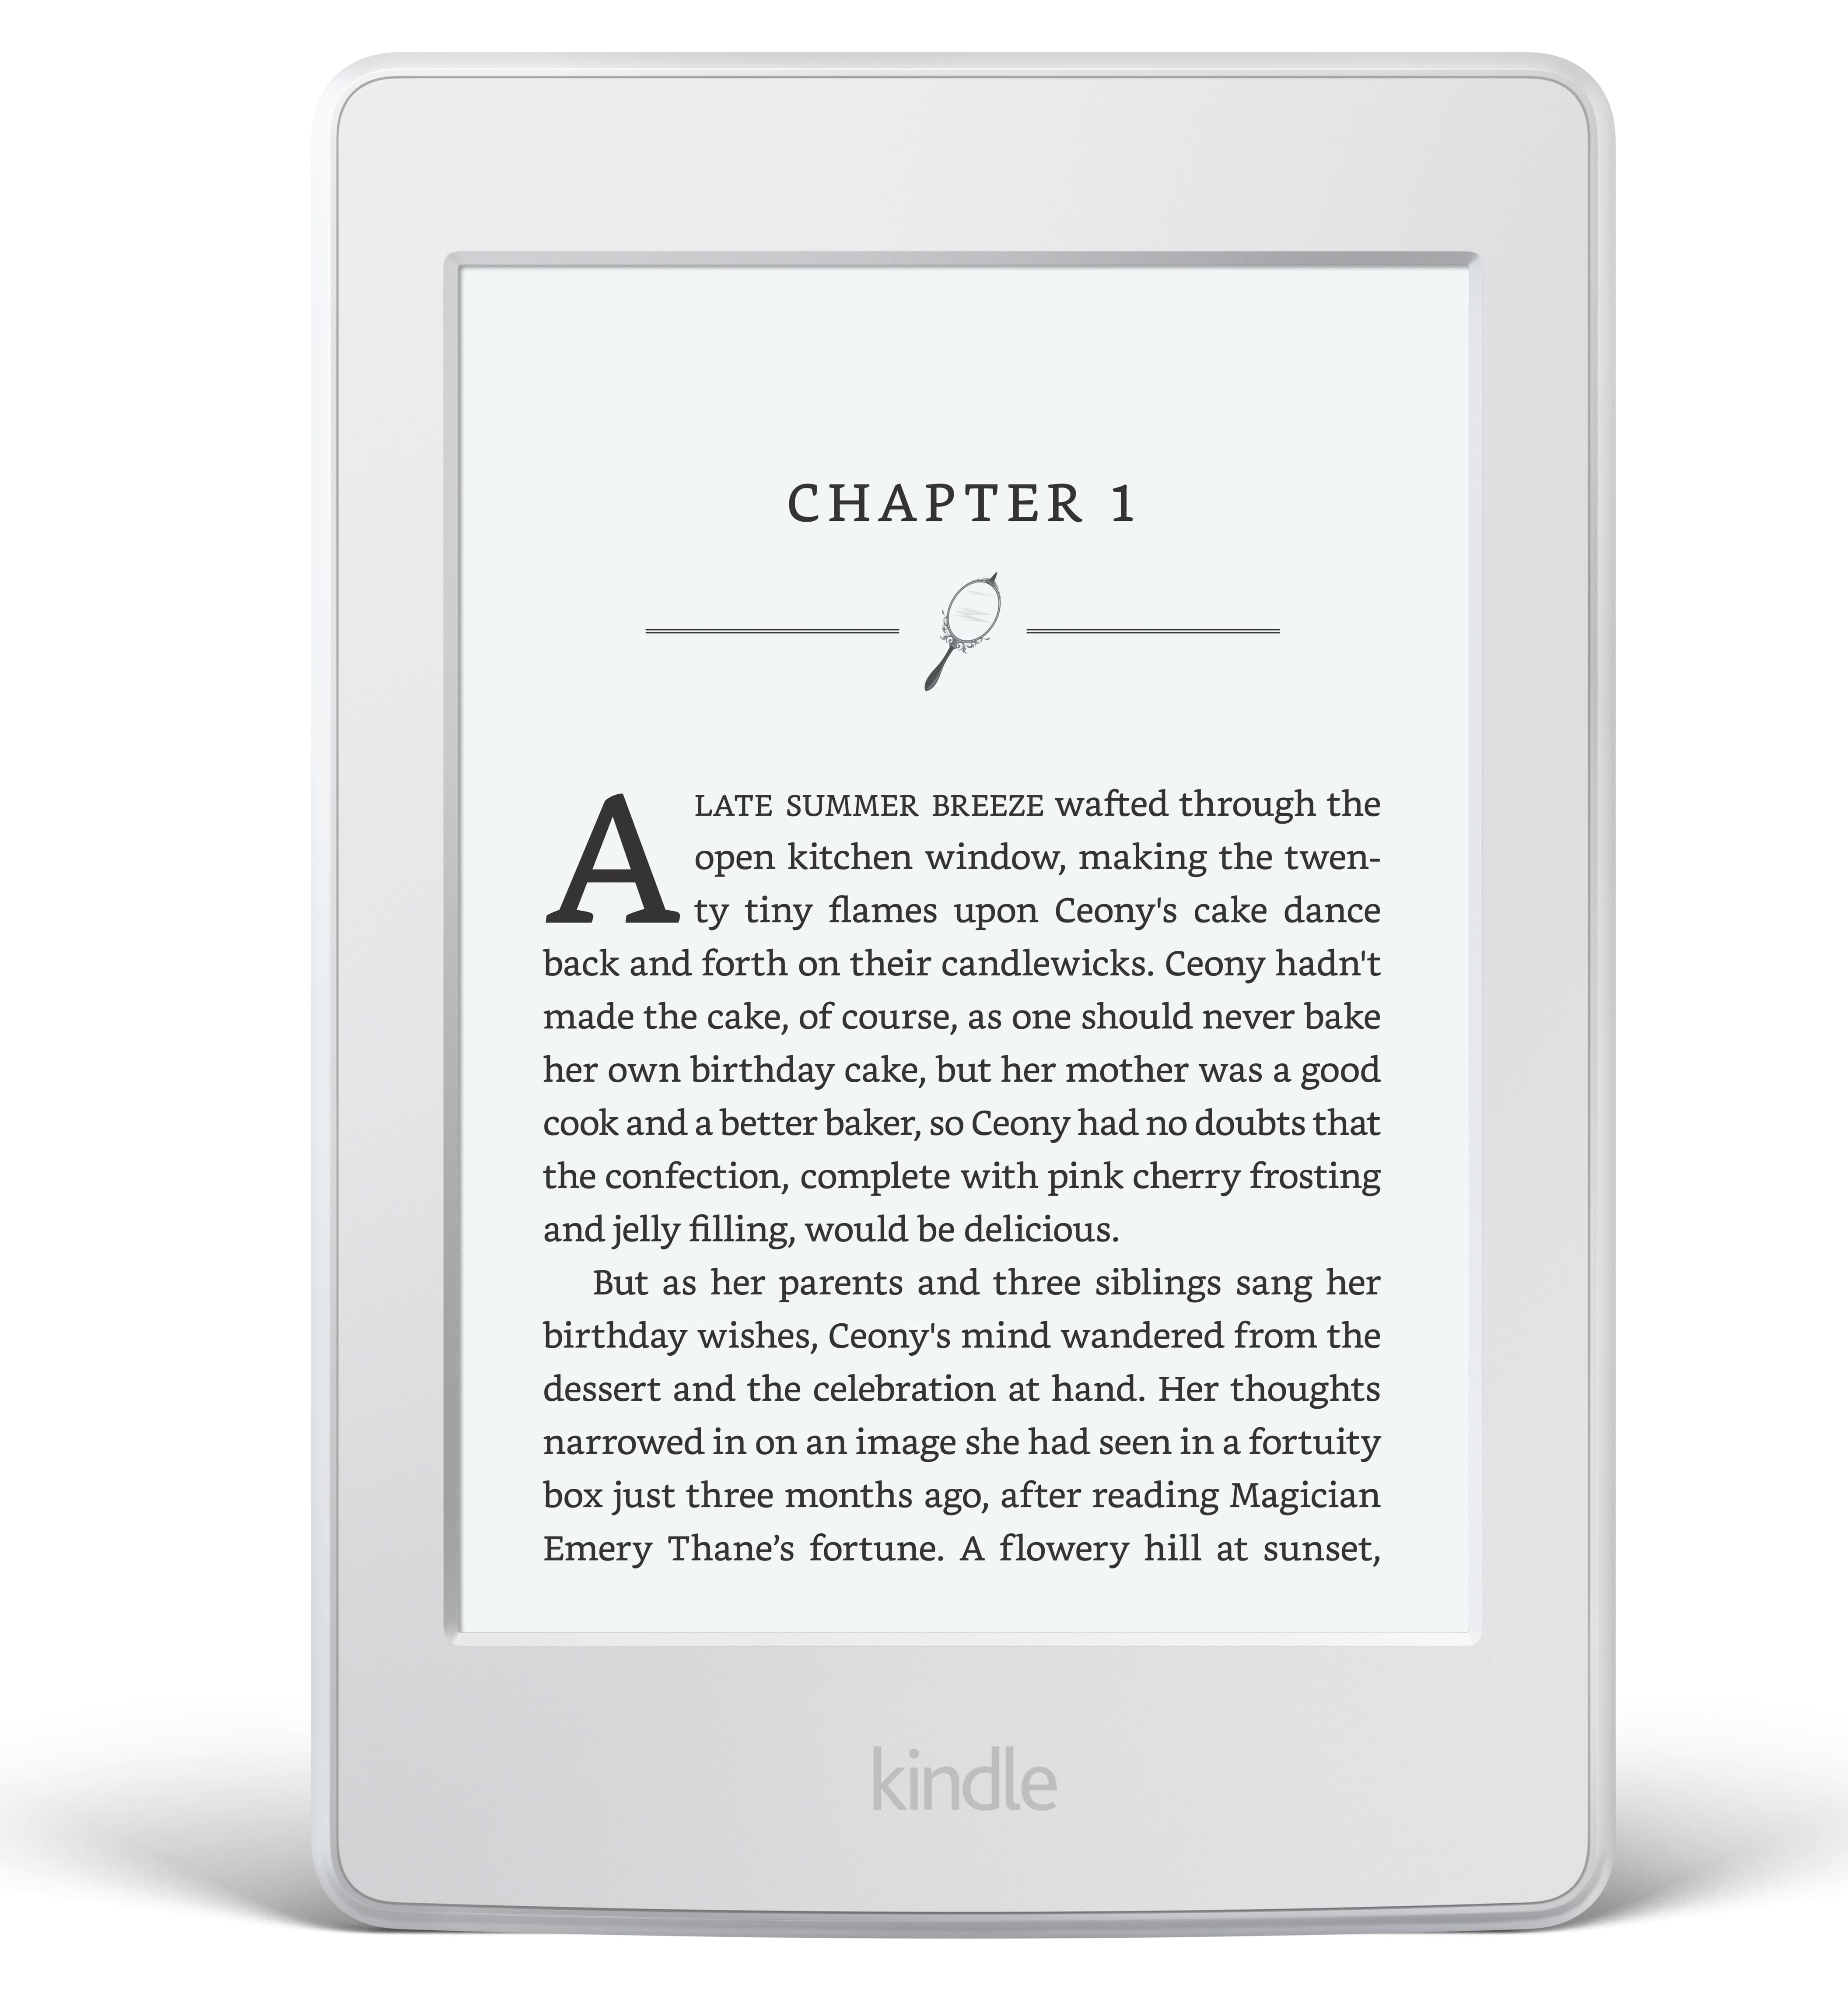 downloading kindle books to computer